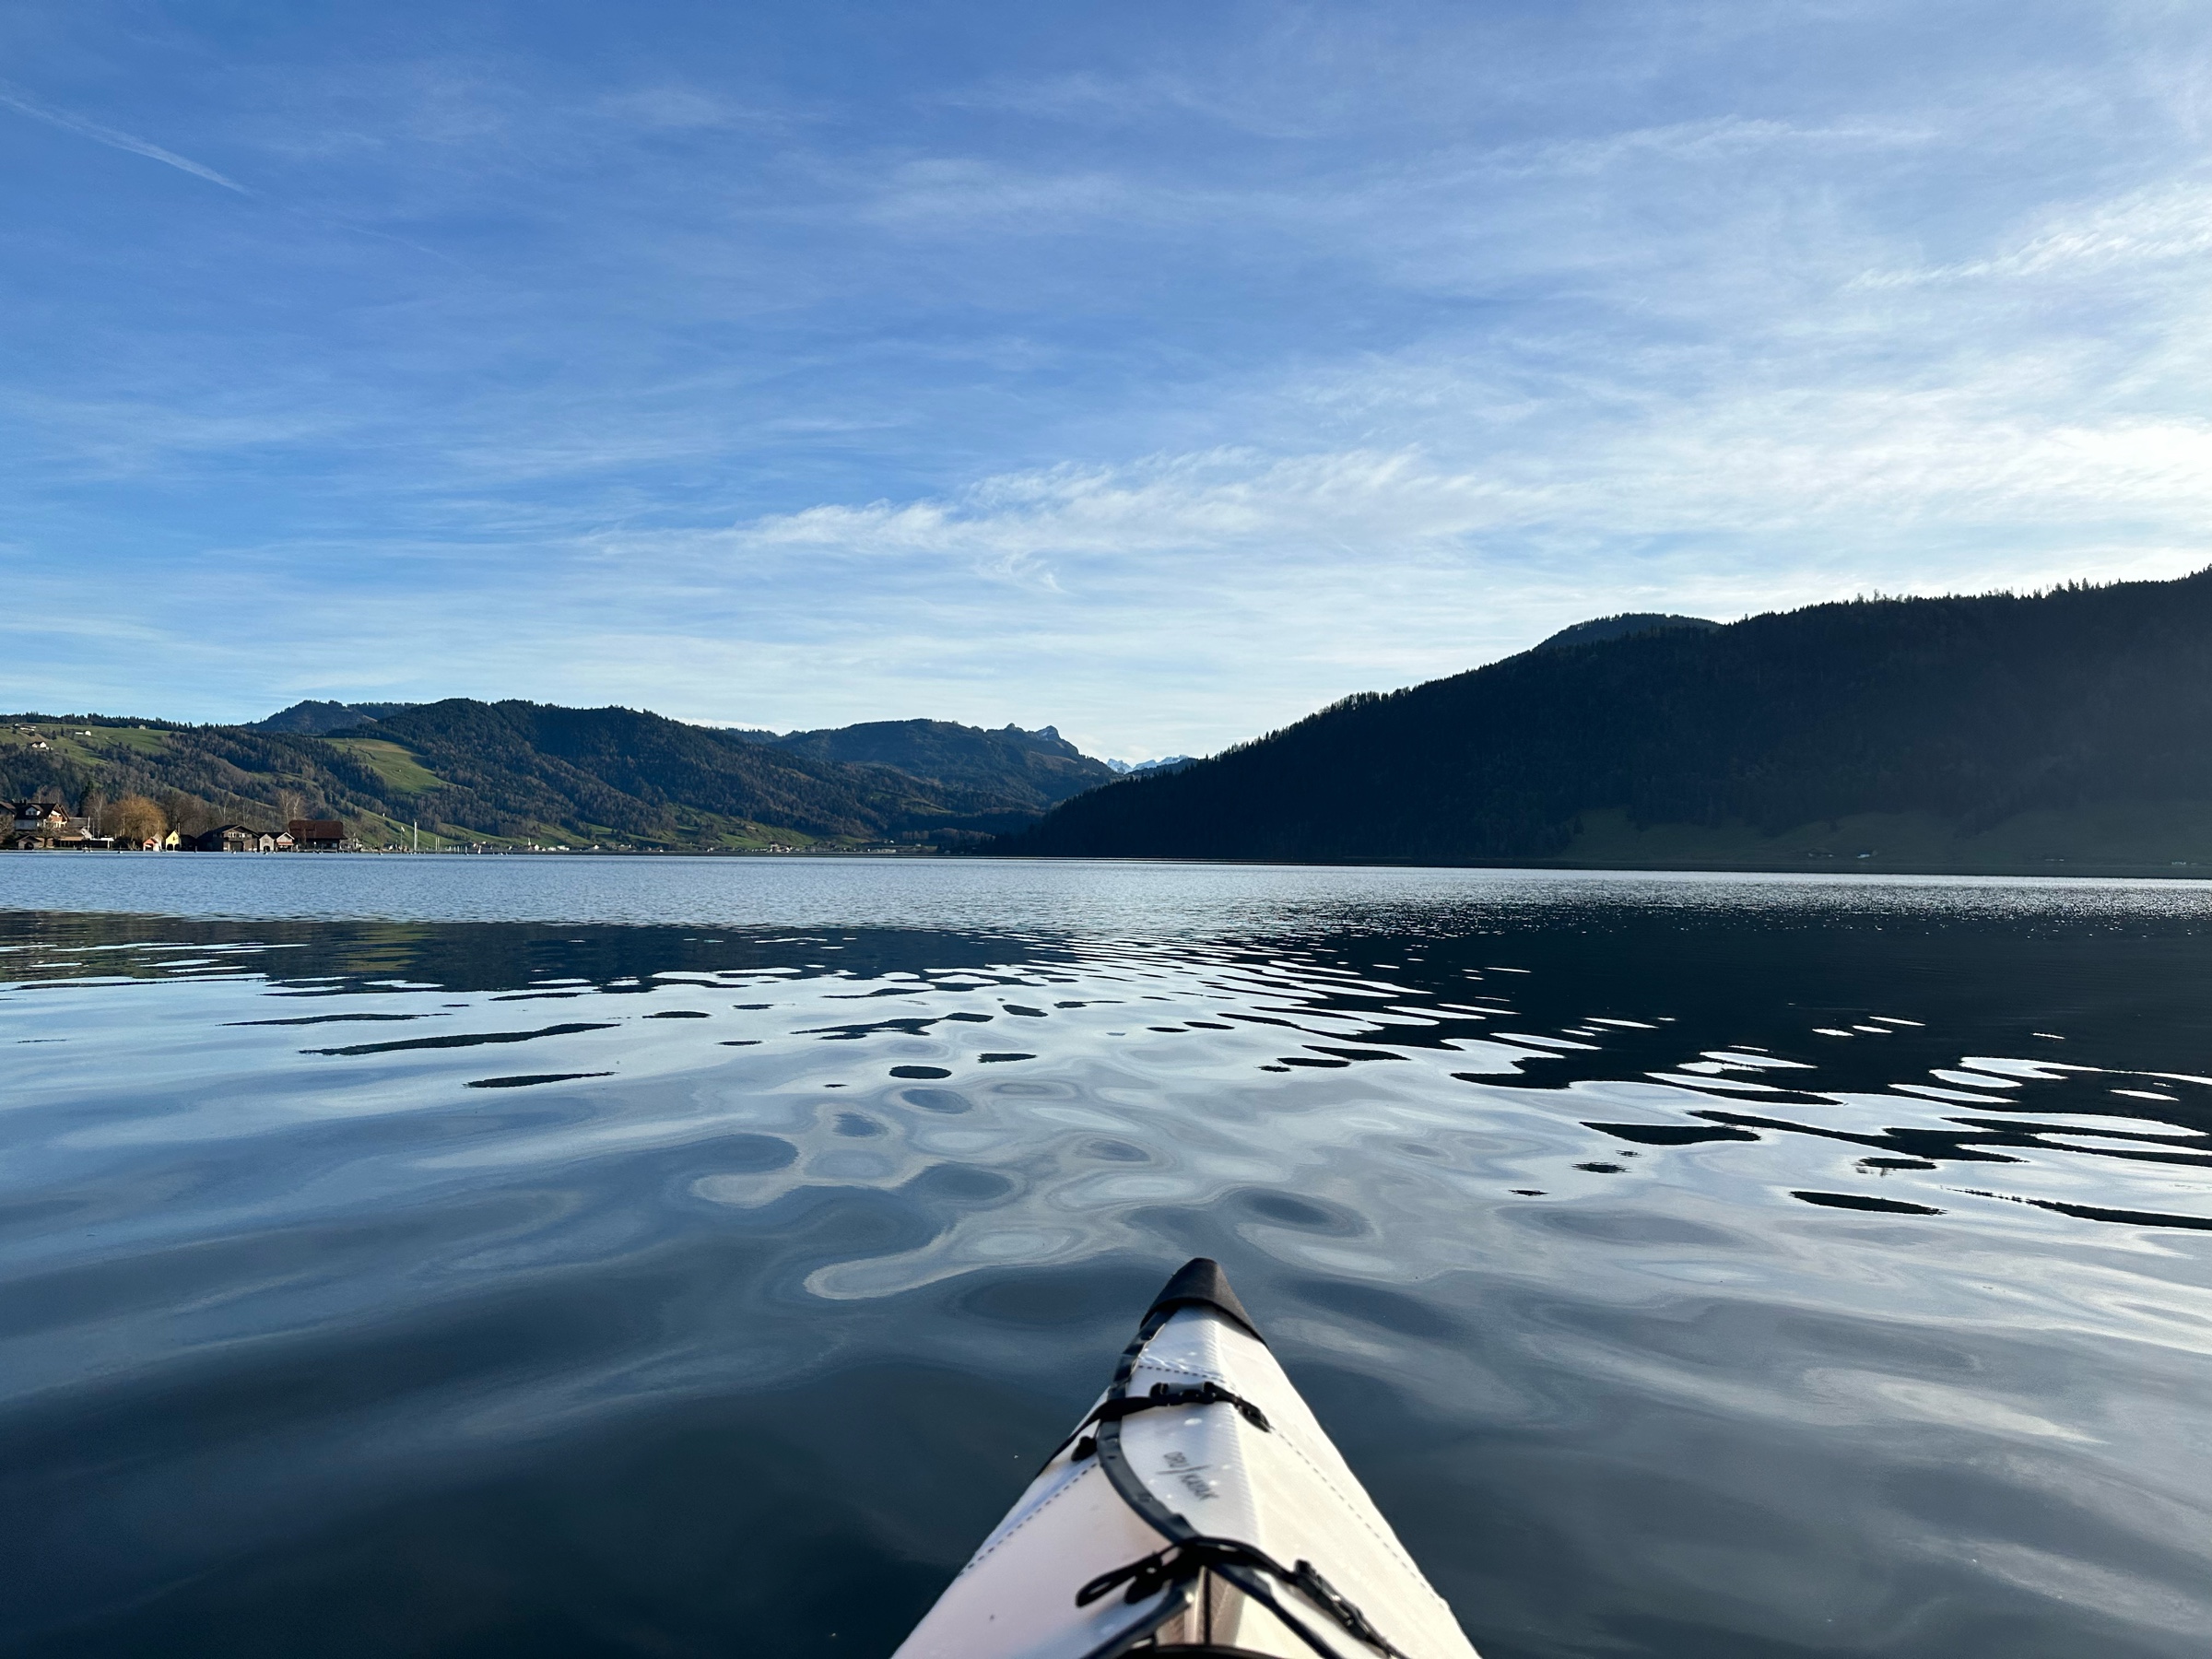 Lake with kayak tip in the foreground and hills and mountains in the background.